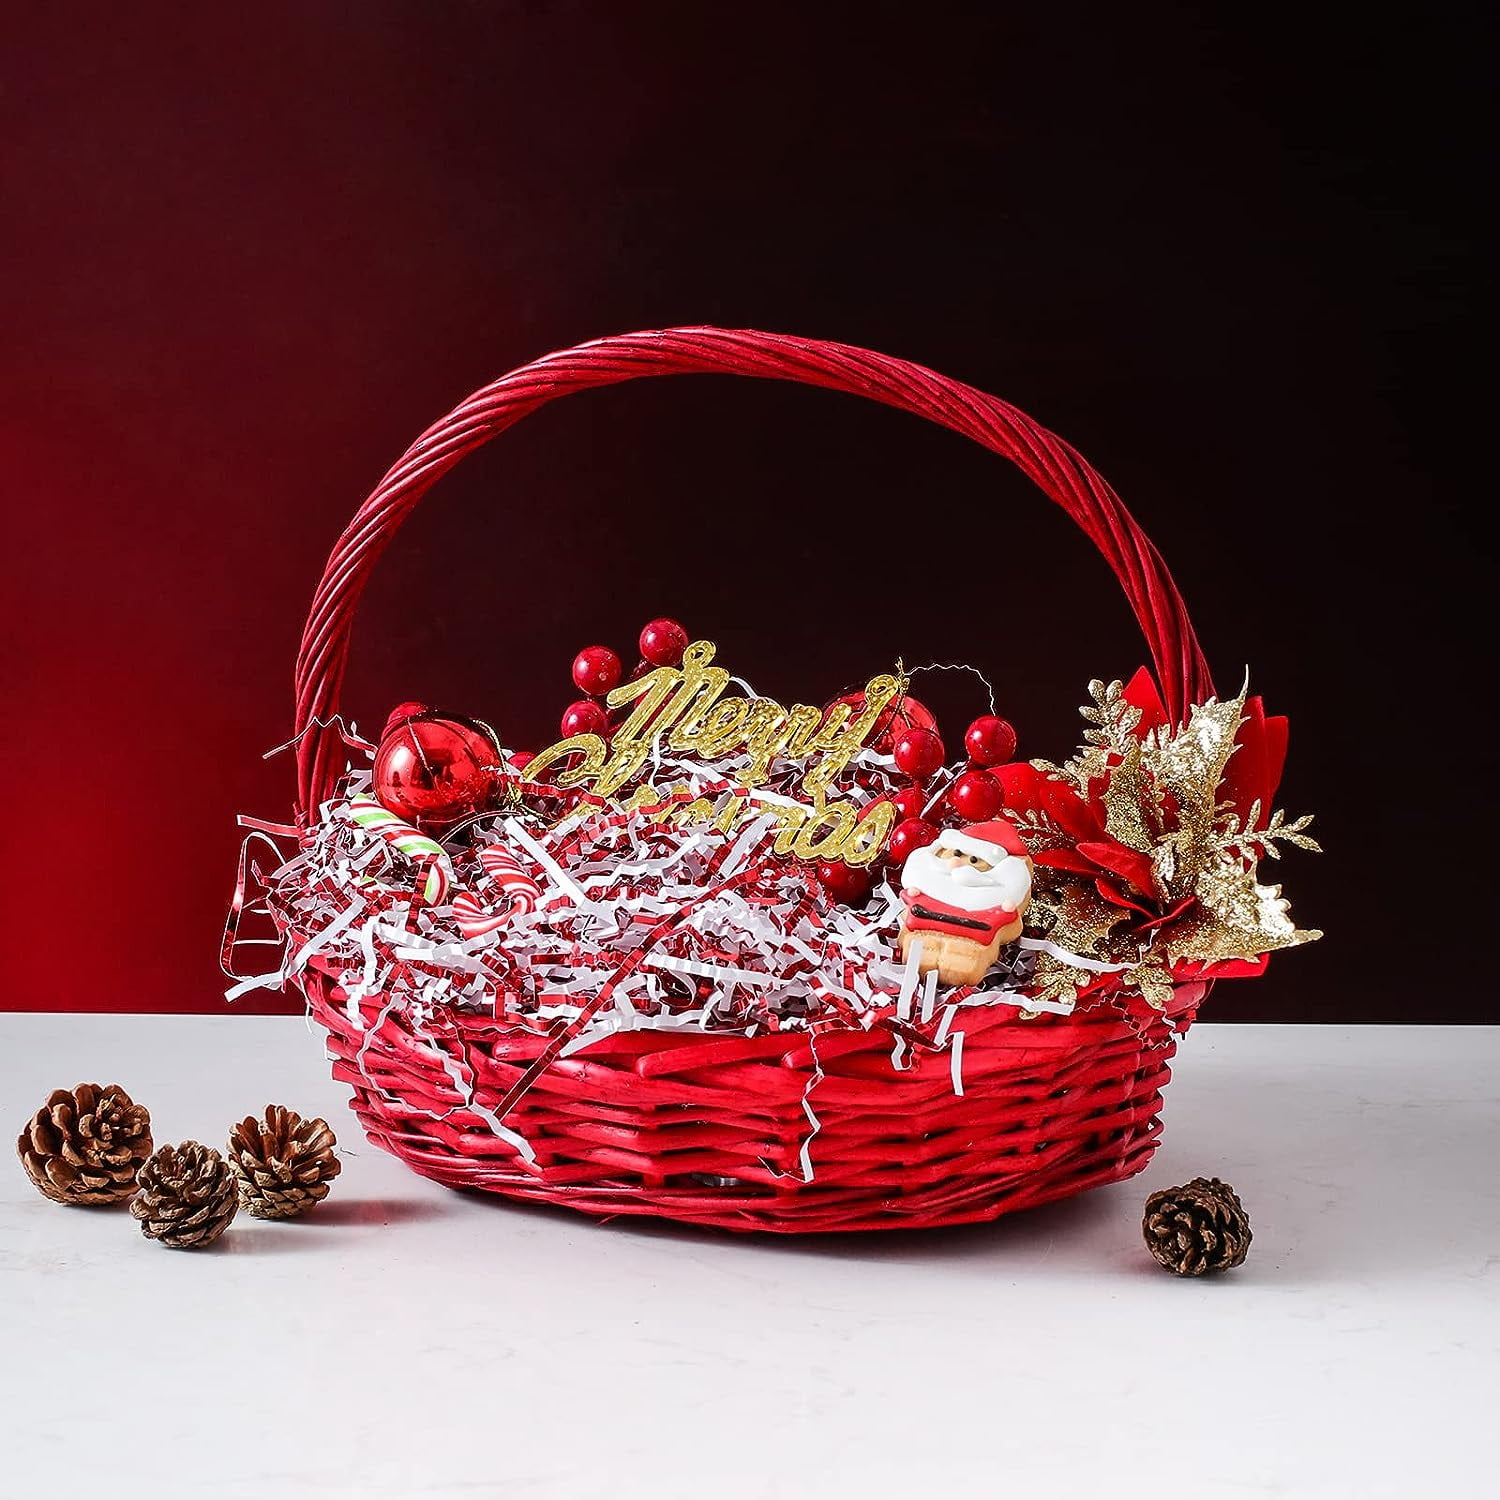 20g Shredded Paper Gift Small Gift Basket Wrap For Festive Decorations,  Weddings, And Home Supplies Factory Direct From Ihomelove, $2.25